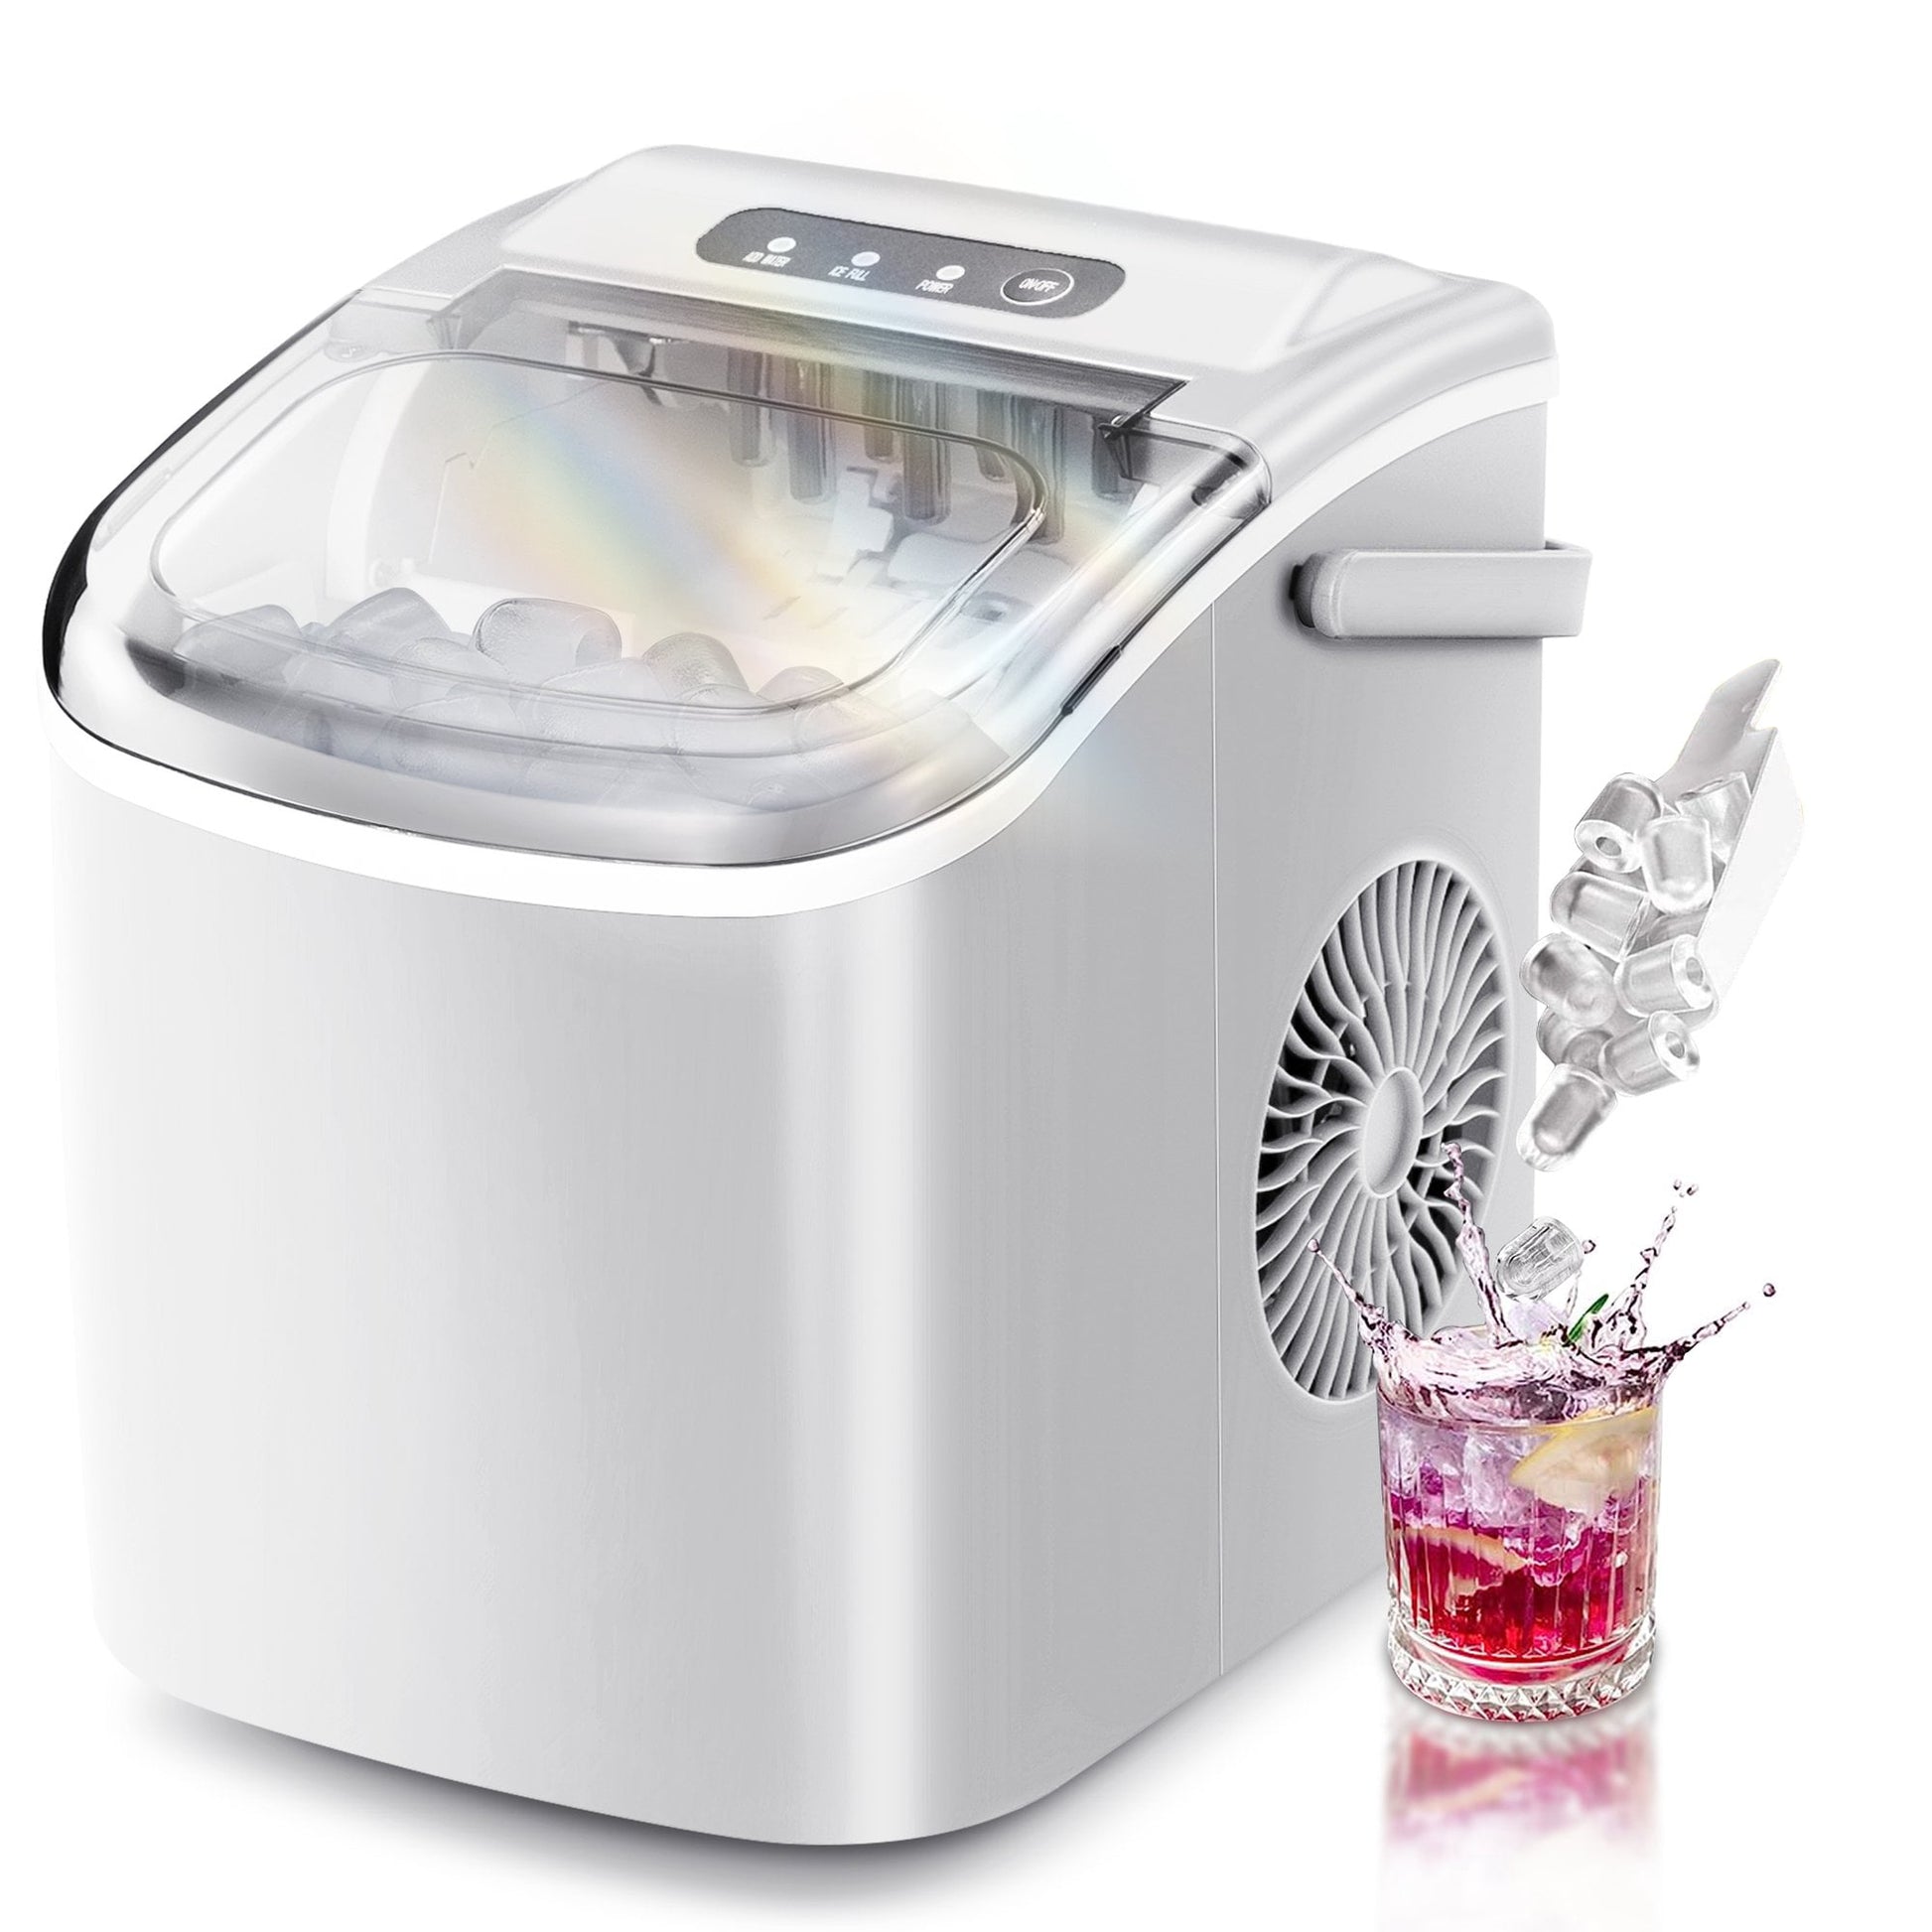 LHRIVER Countertop Ice Maker Portable Ice Machine with Handle